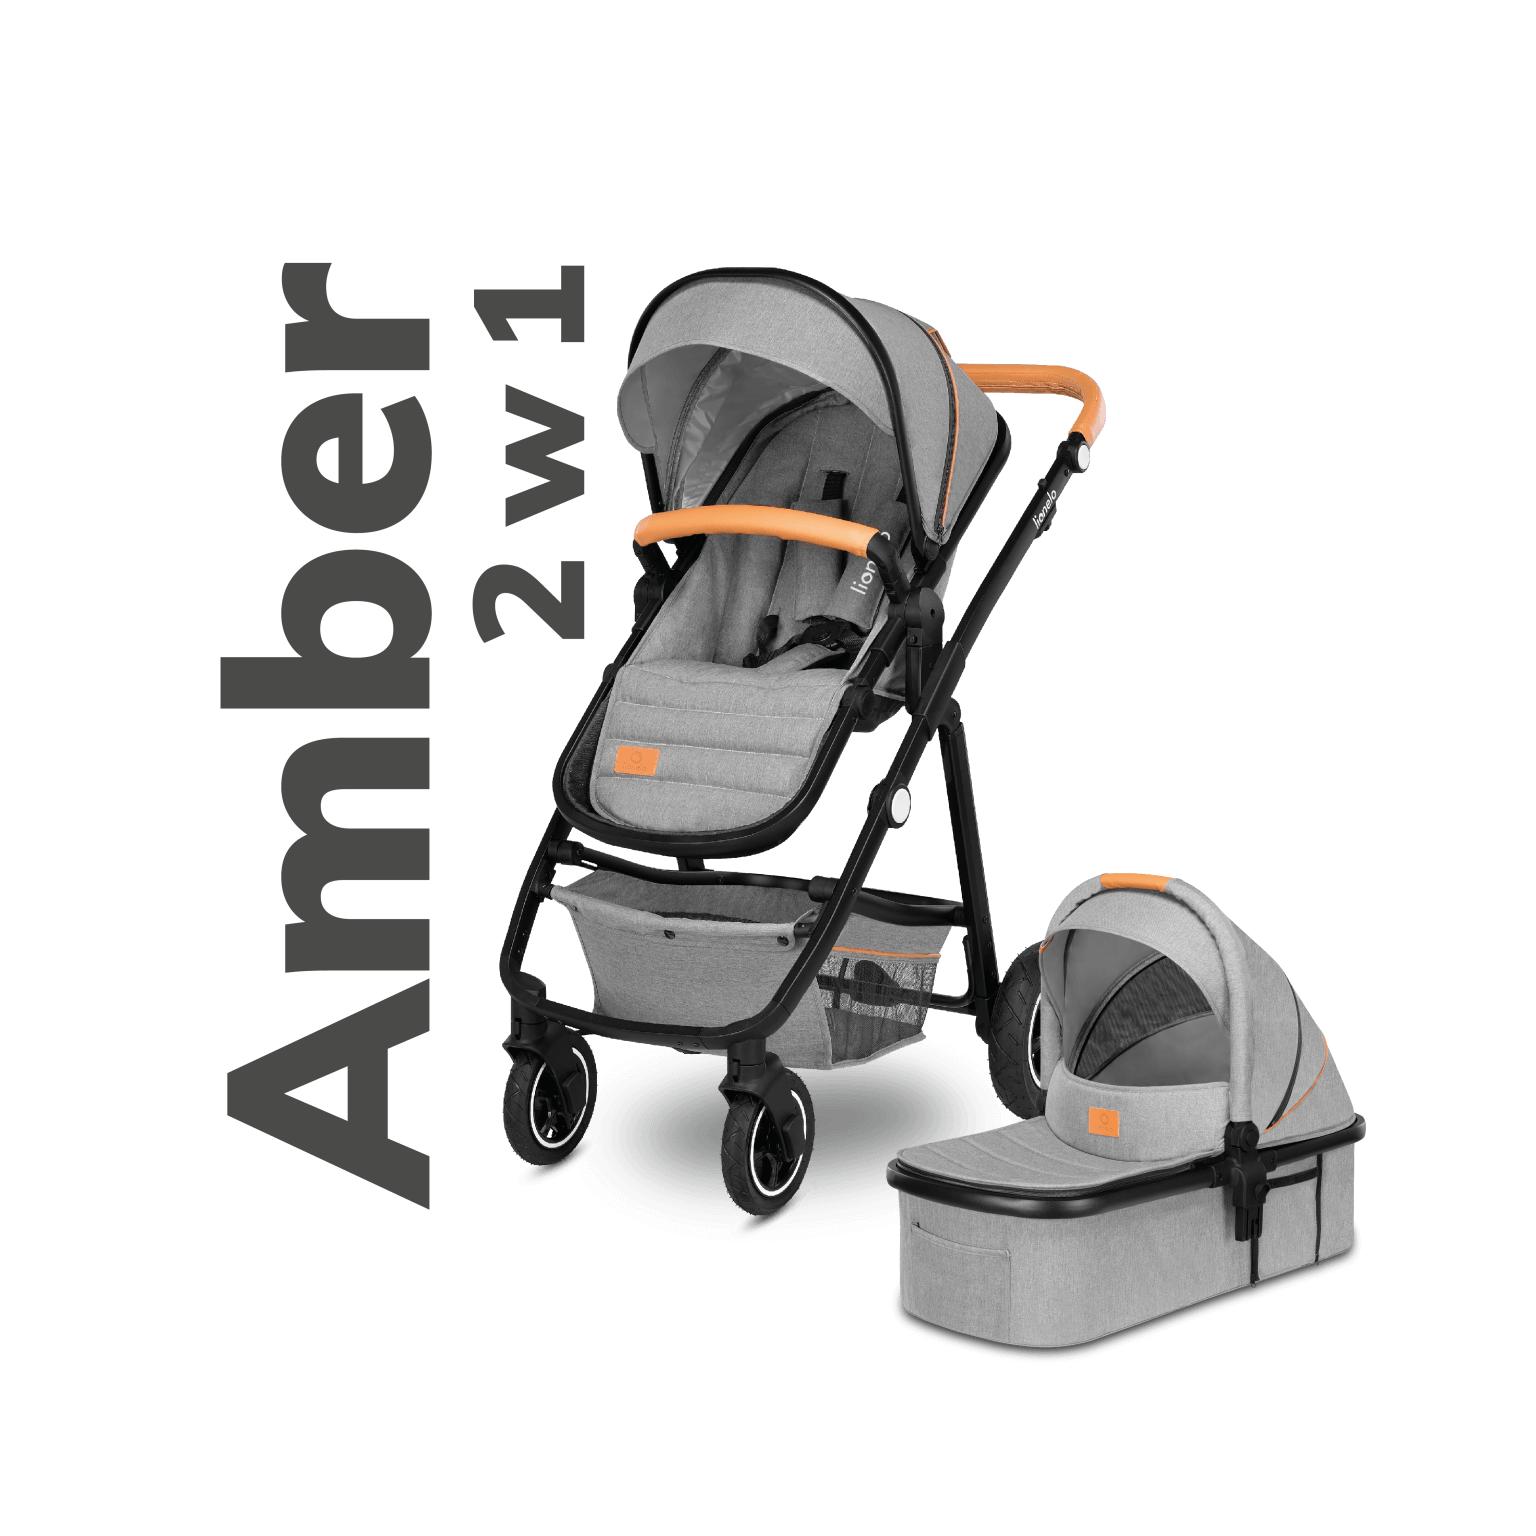 Lionelo Amber stroller reviews, questions, dimensions